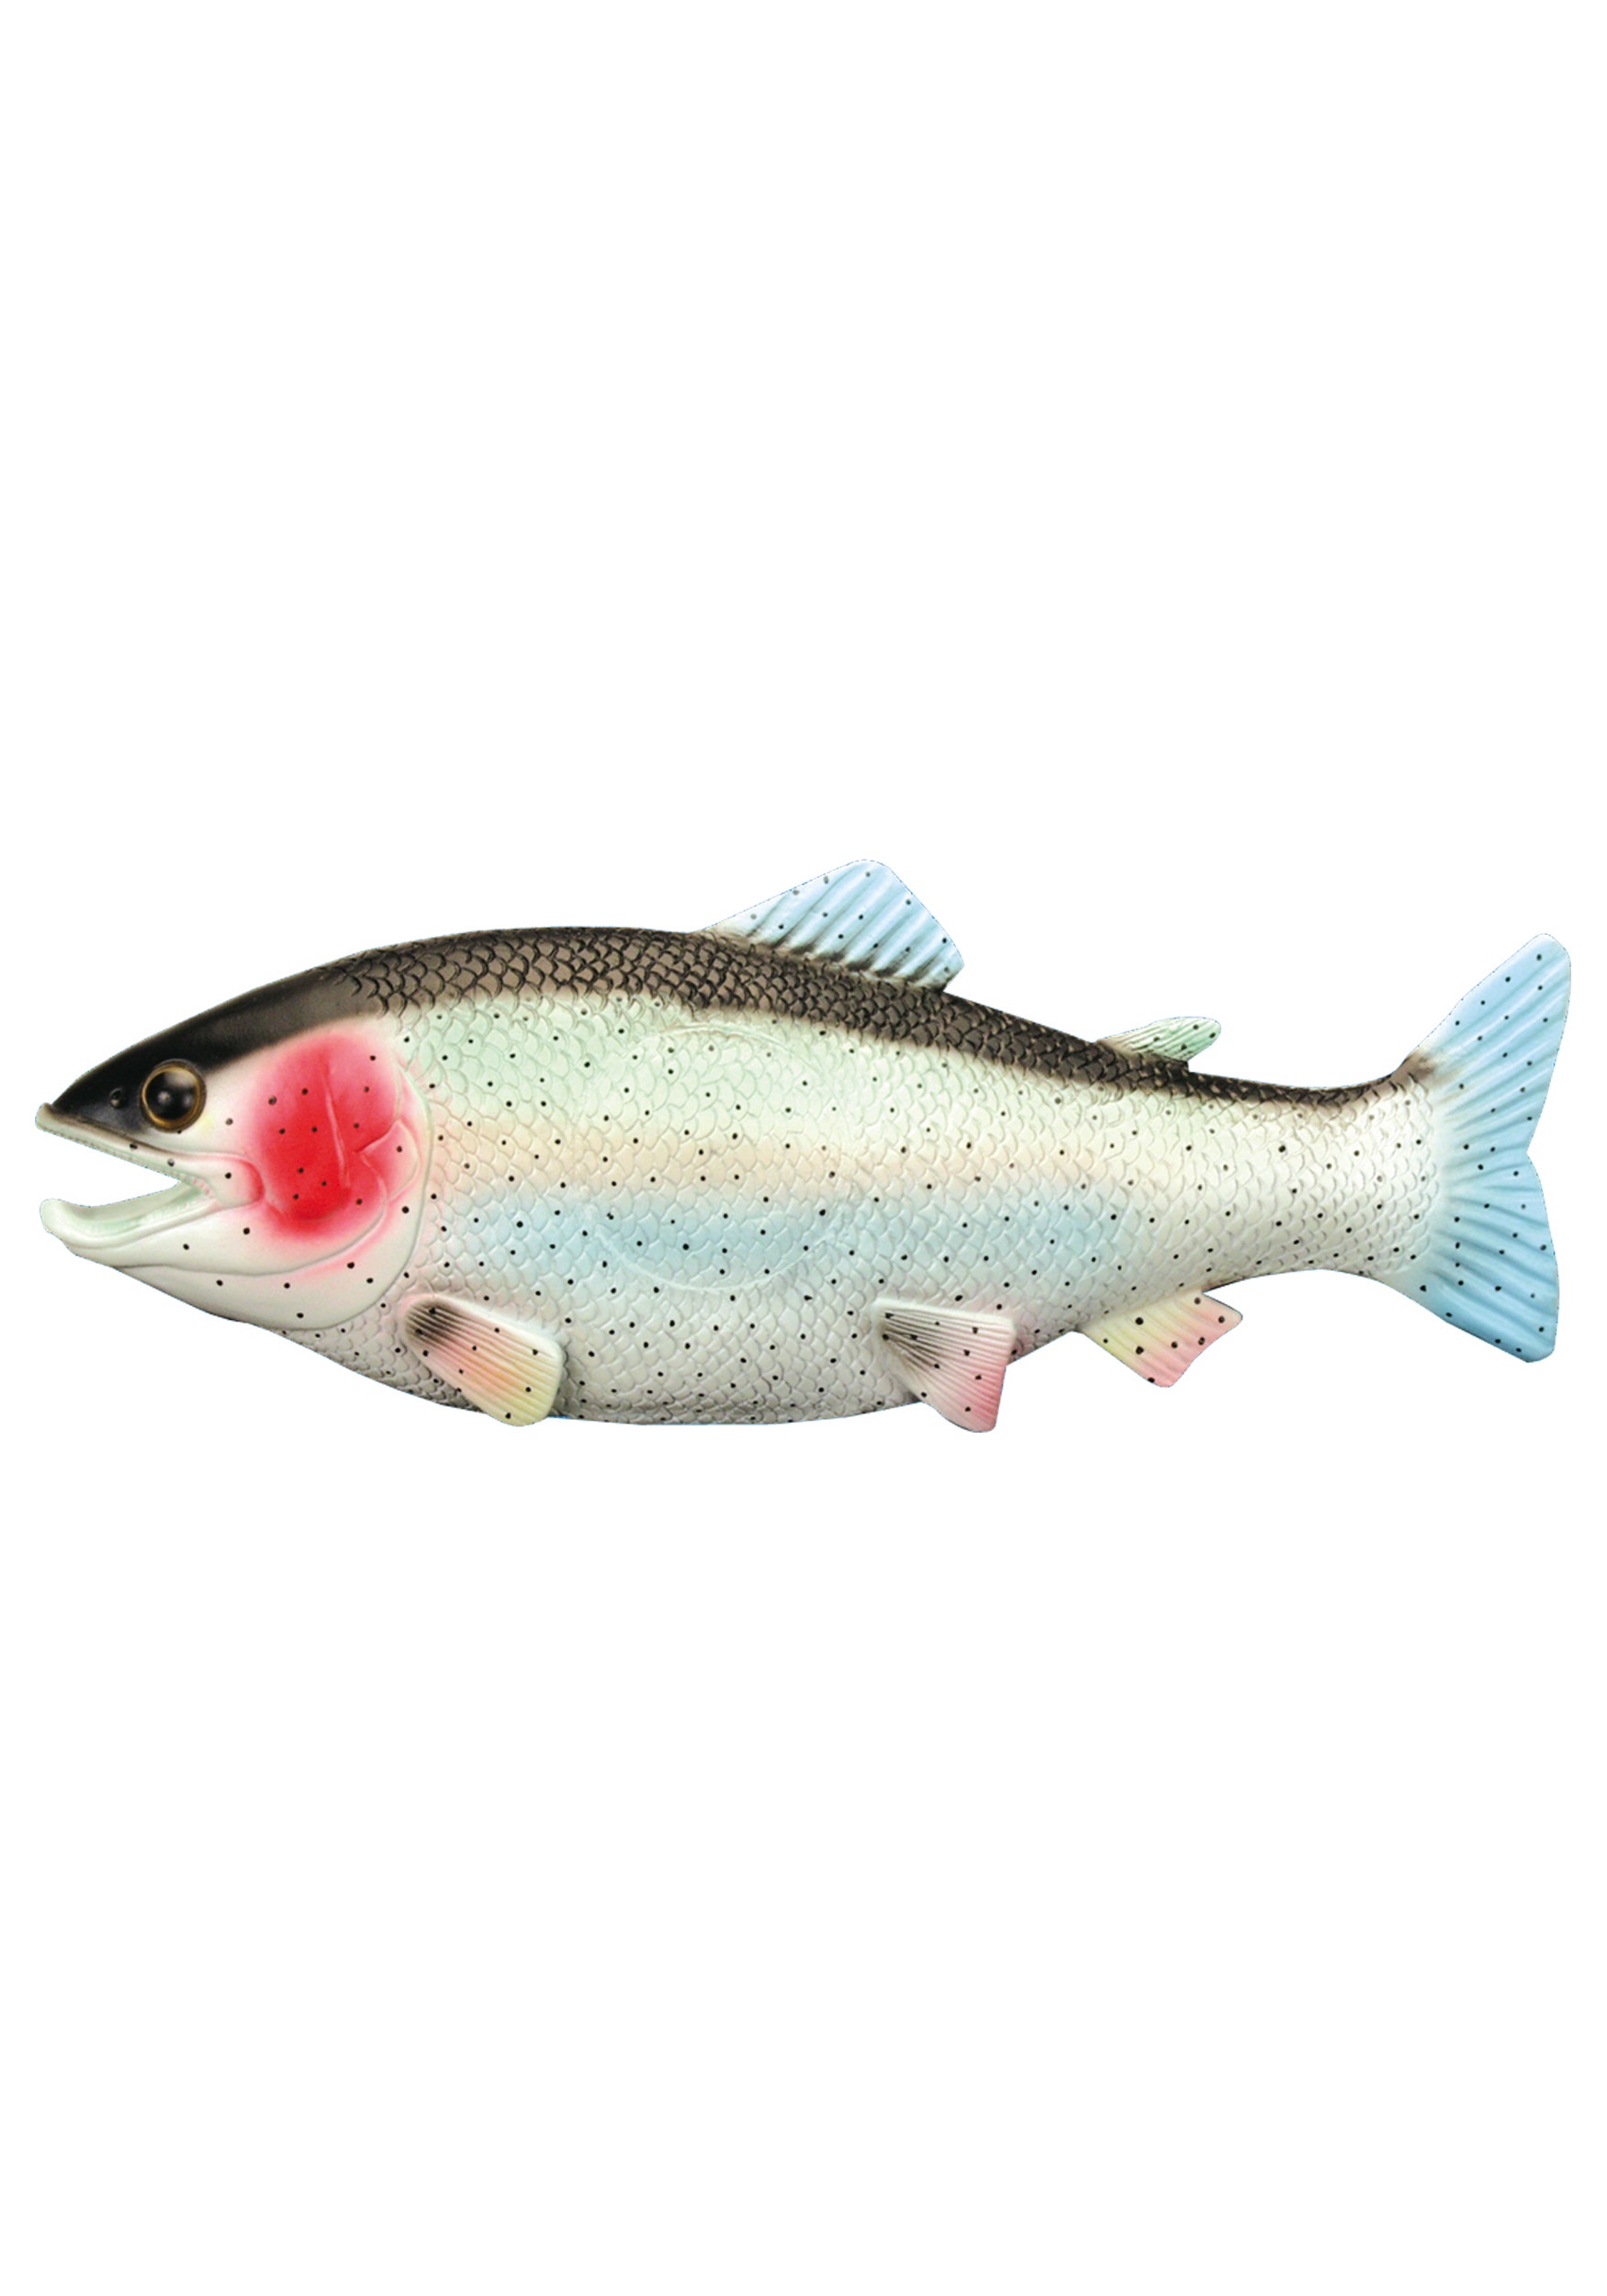 https://images.halloweencostumes.ca/products/16532/1-1/rubber-fish-prop.jpg